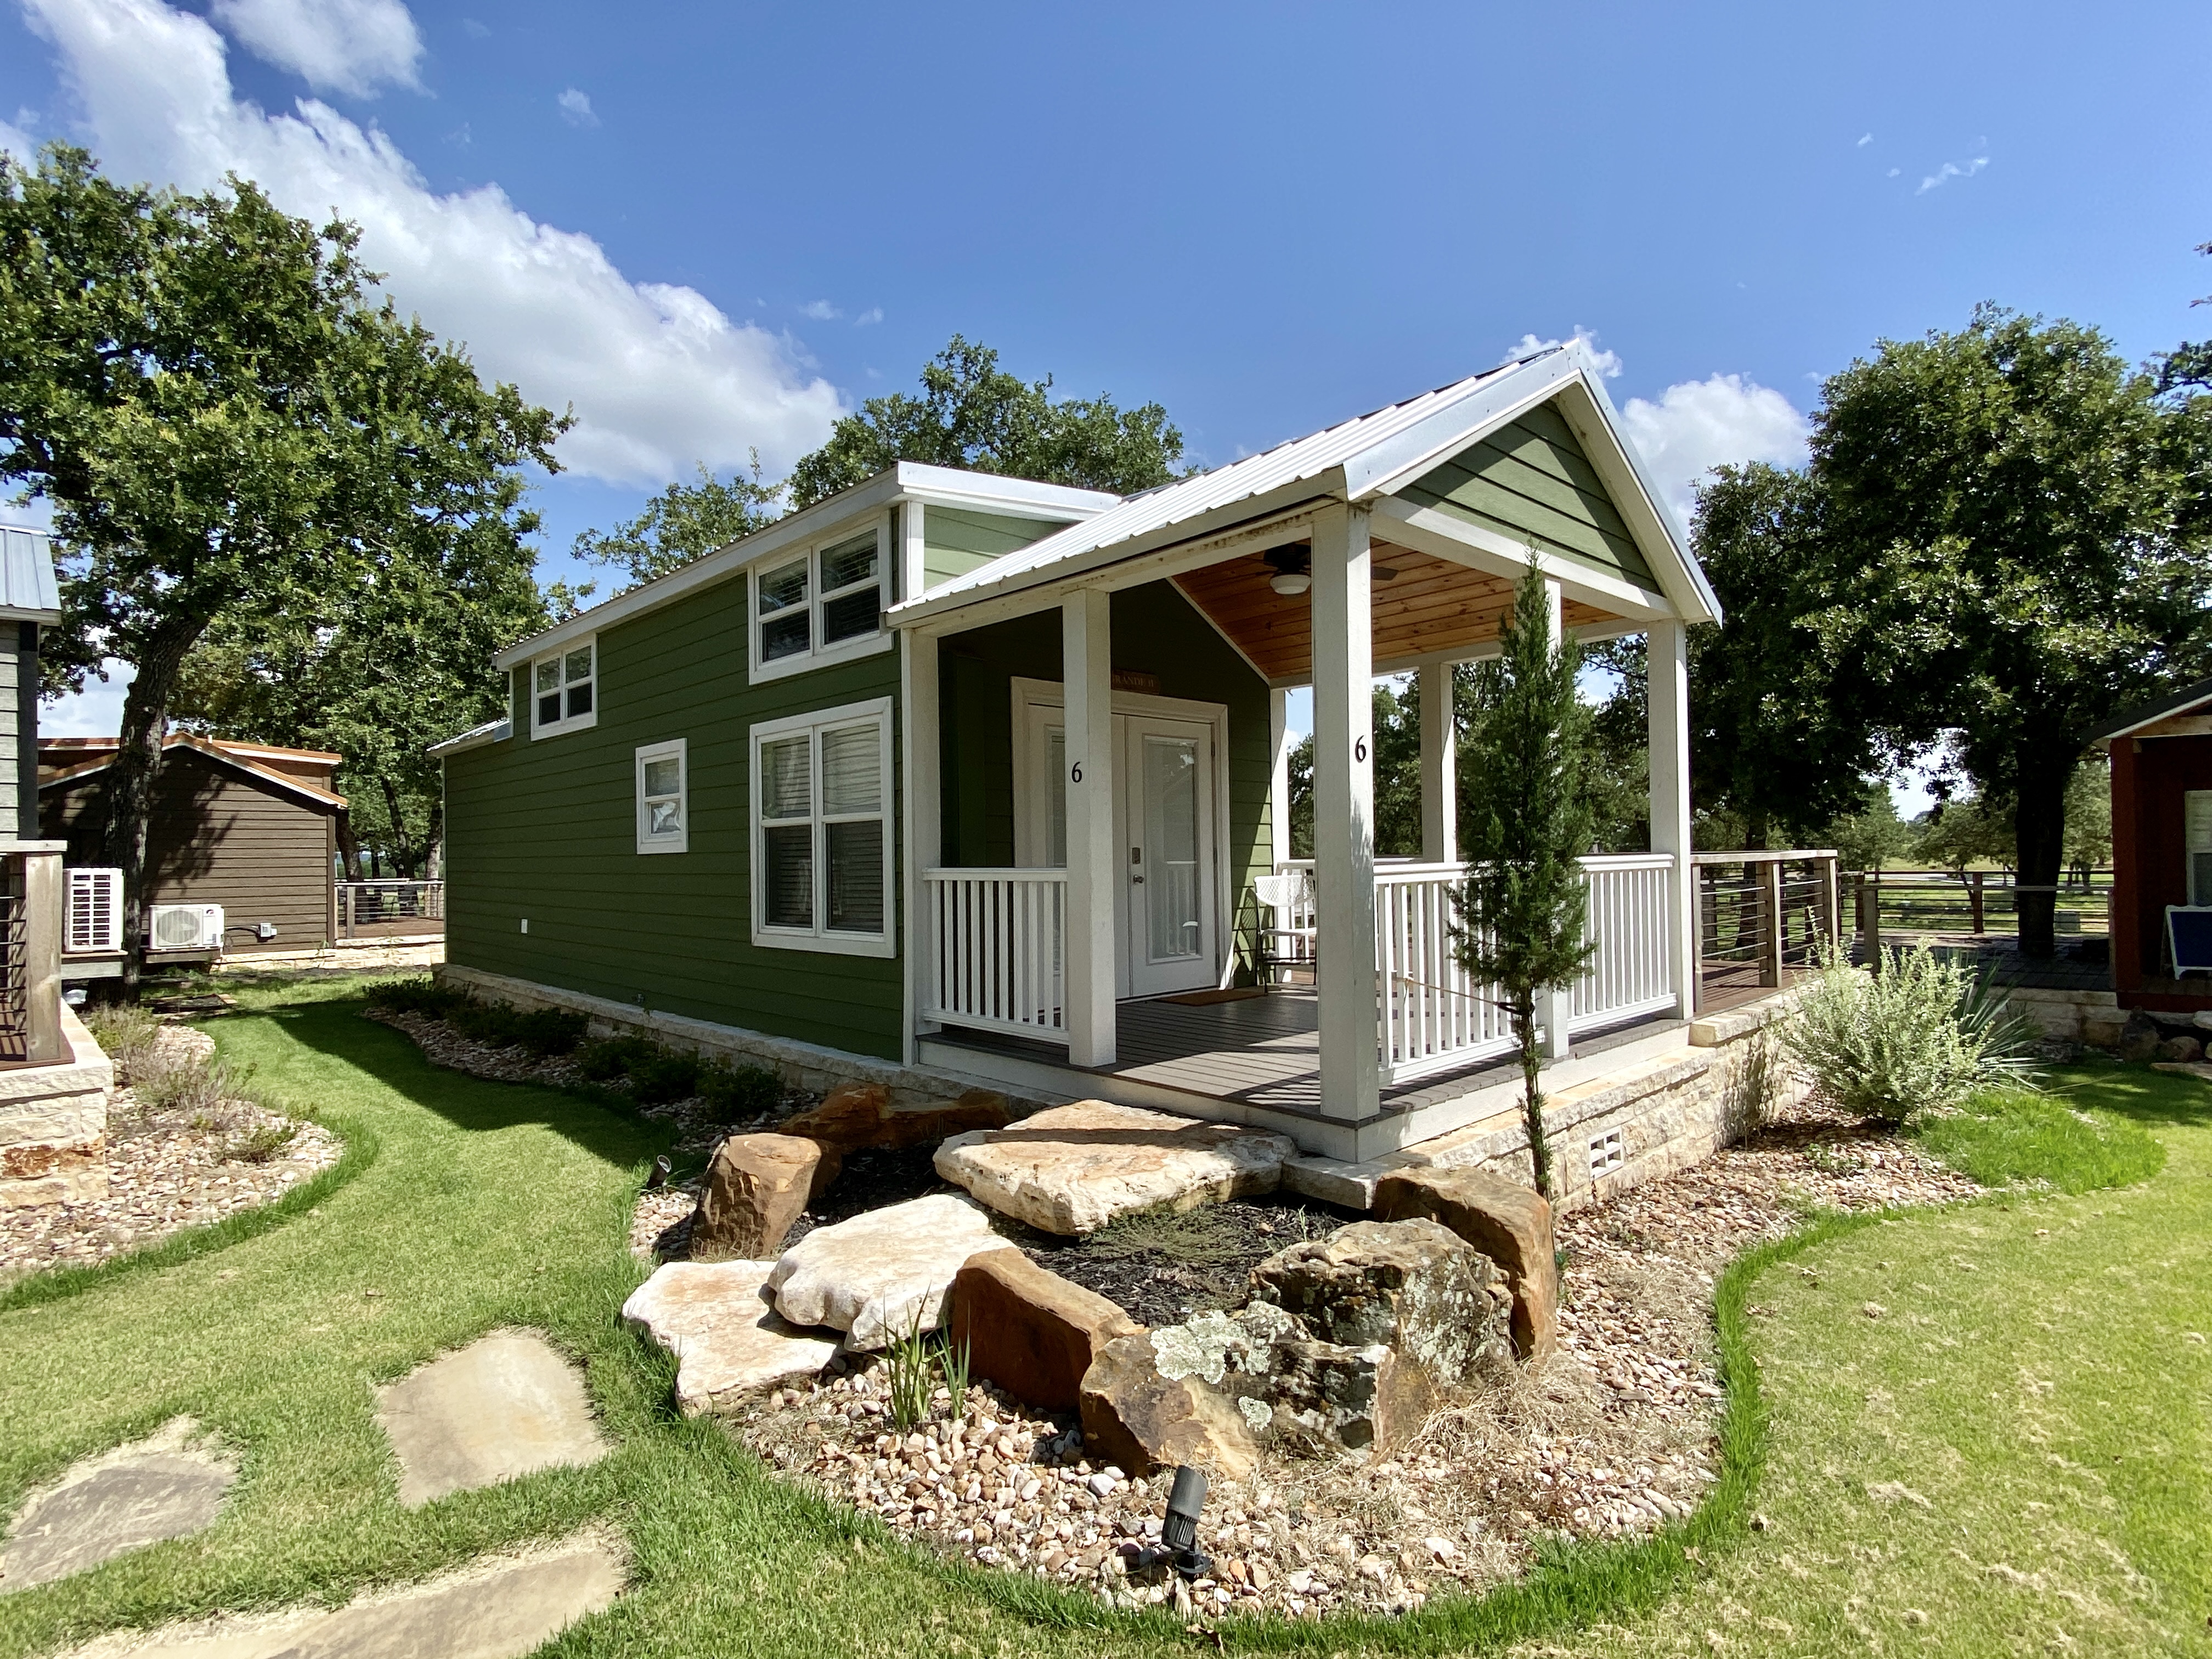 Welcome to The Resort at Fredericksburg! A premier Hill Country experience nested on the Pedernales River, 1 mile to Fred. Indulge in stunning views, exceptional wine, and great food. You'll be able to eat, drink, and stay all here at The Resort